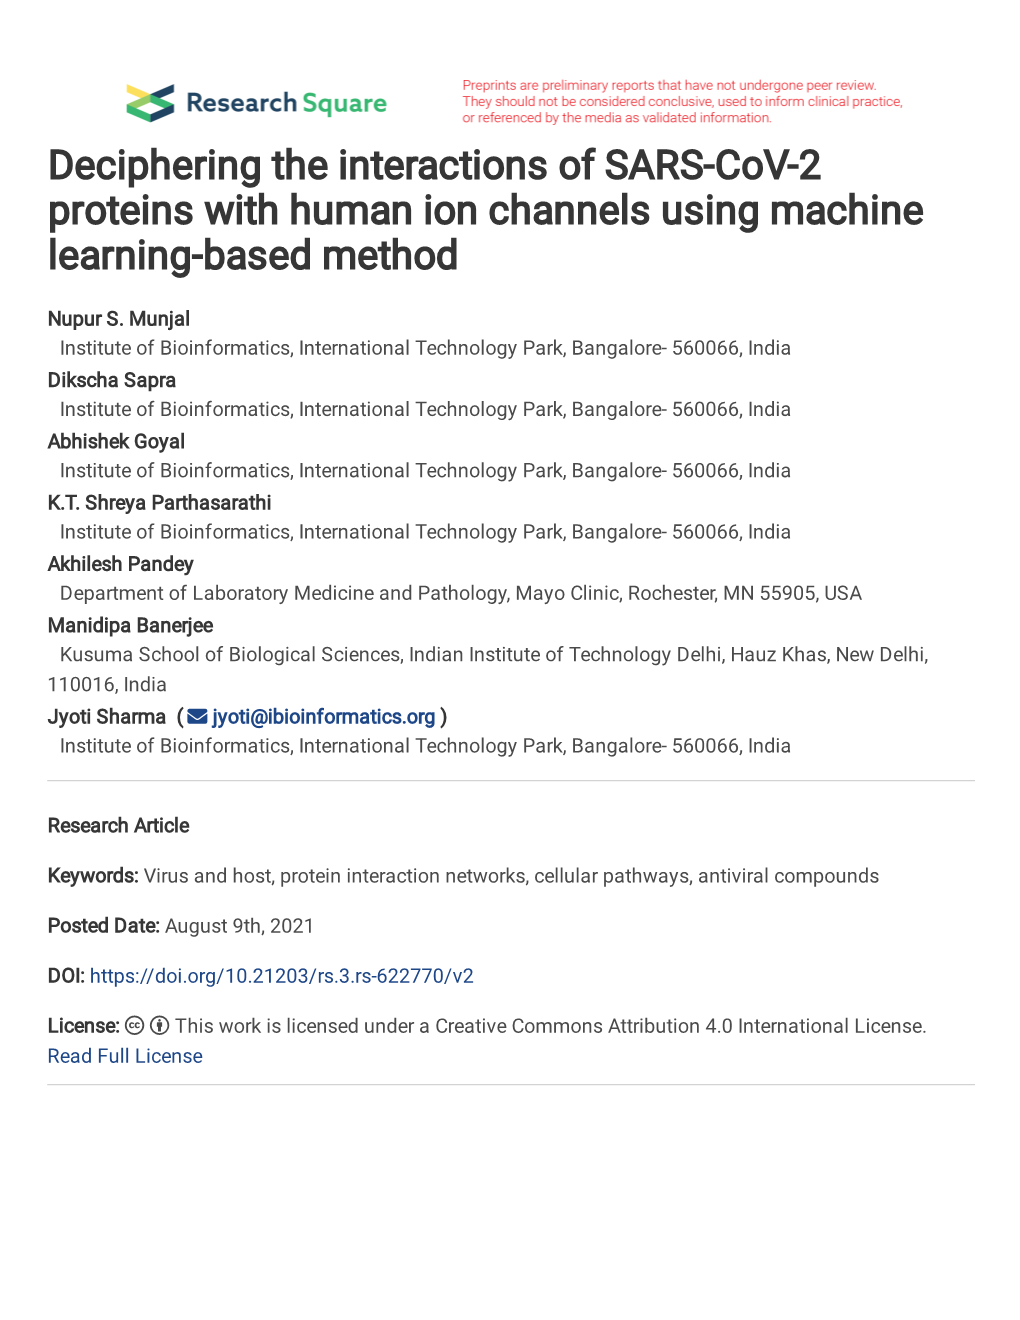 Deciphering the Interactions of SARS-Cov-2 Proteins with Human Ion Channels Using Machine Learning-Based Method